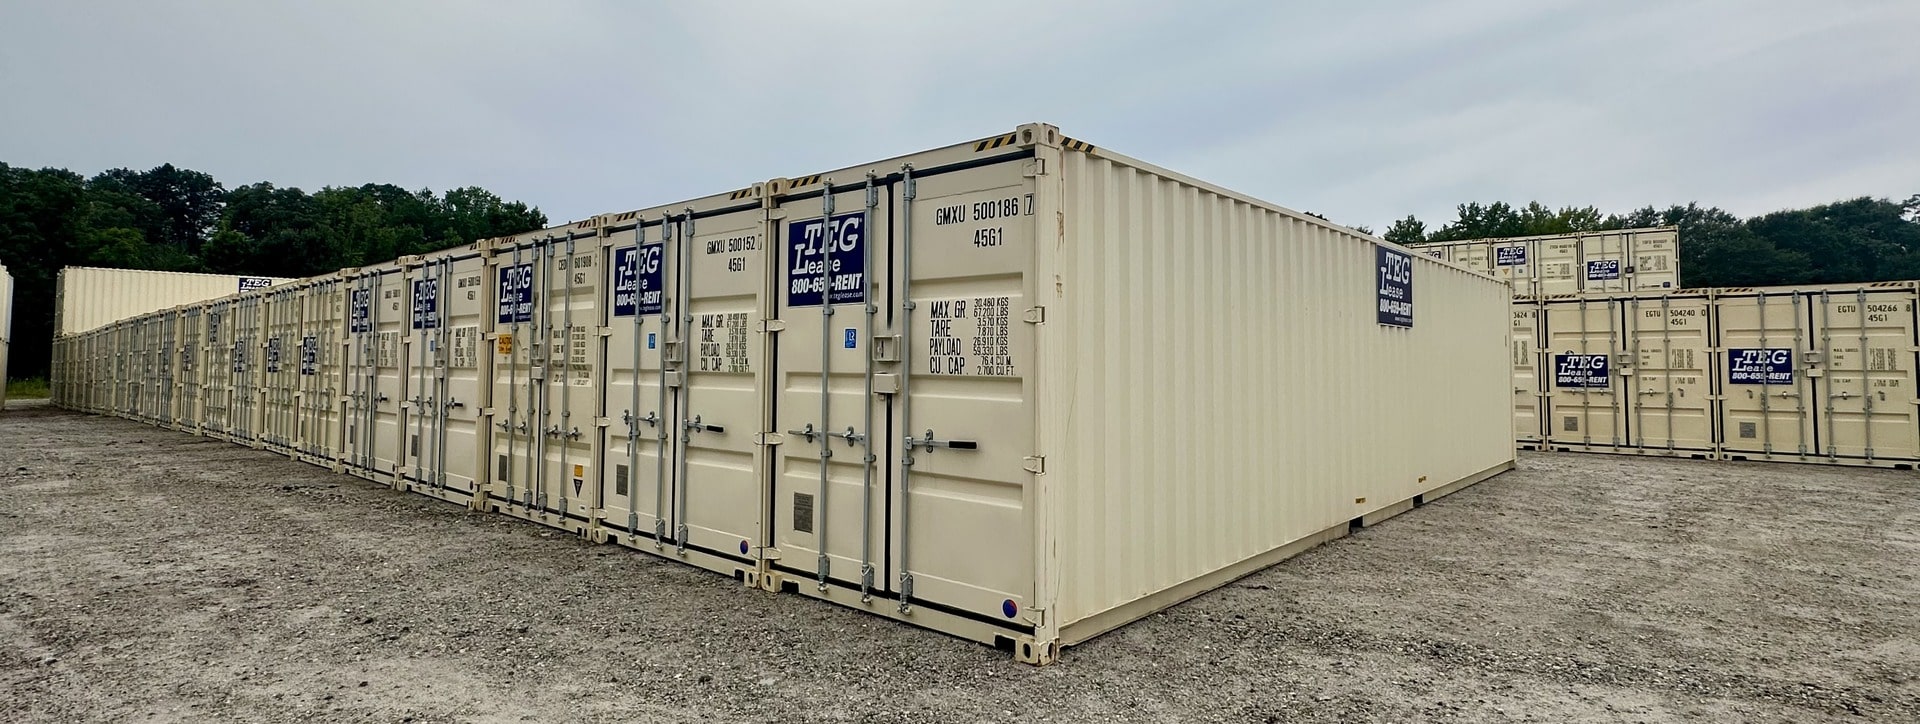 Photo #2 of Portable Storage Containers located in Kingsport, TN